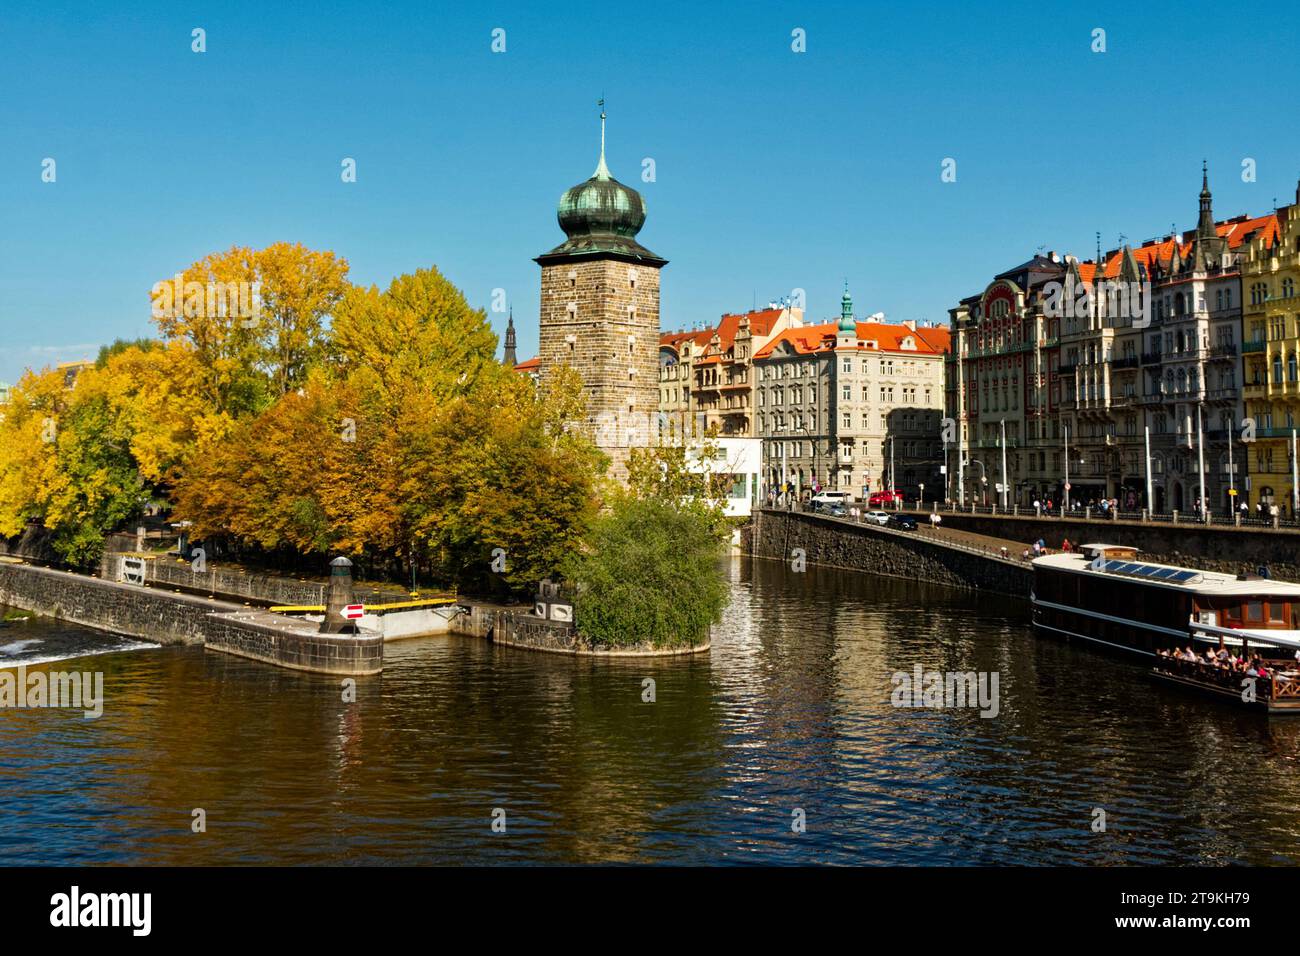 A river scene with a green-domed tower on the left bank and colorful buildings on the right. Ancient tower on the river bank in the fall. Autumn Pragu Stock Photo